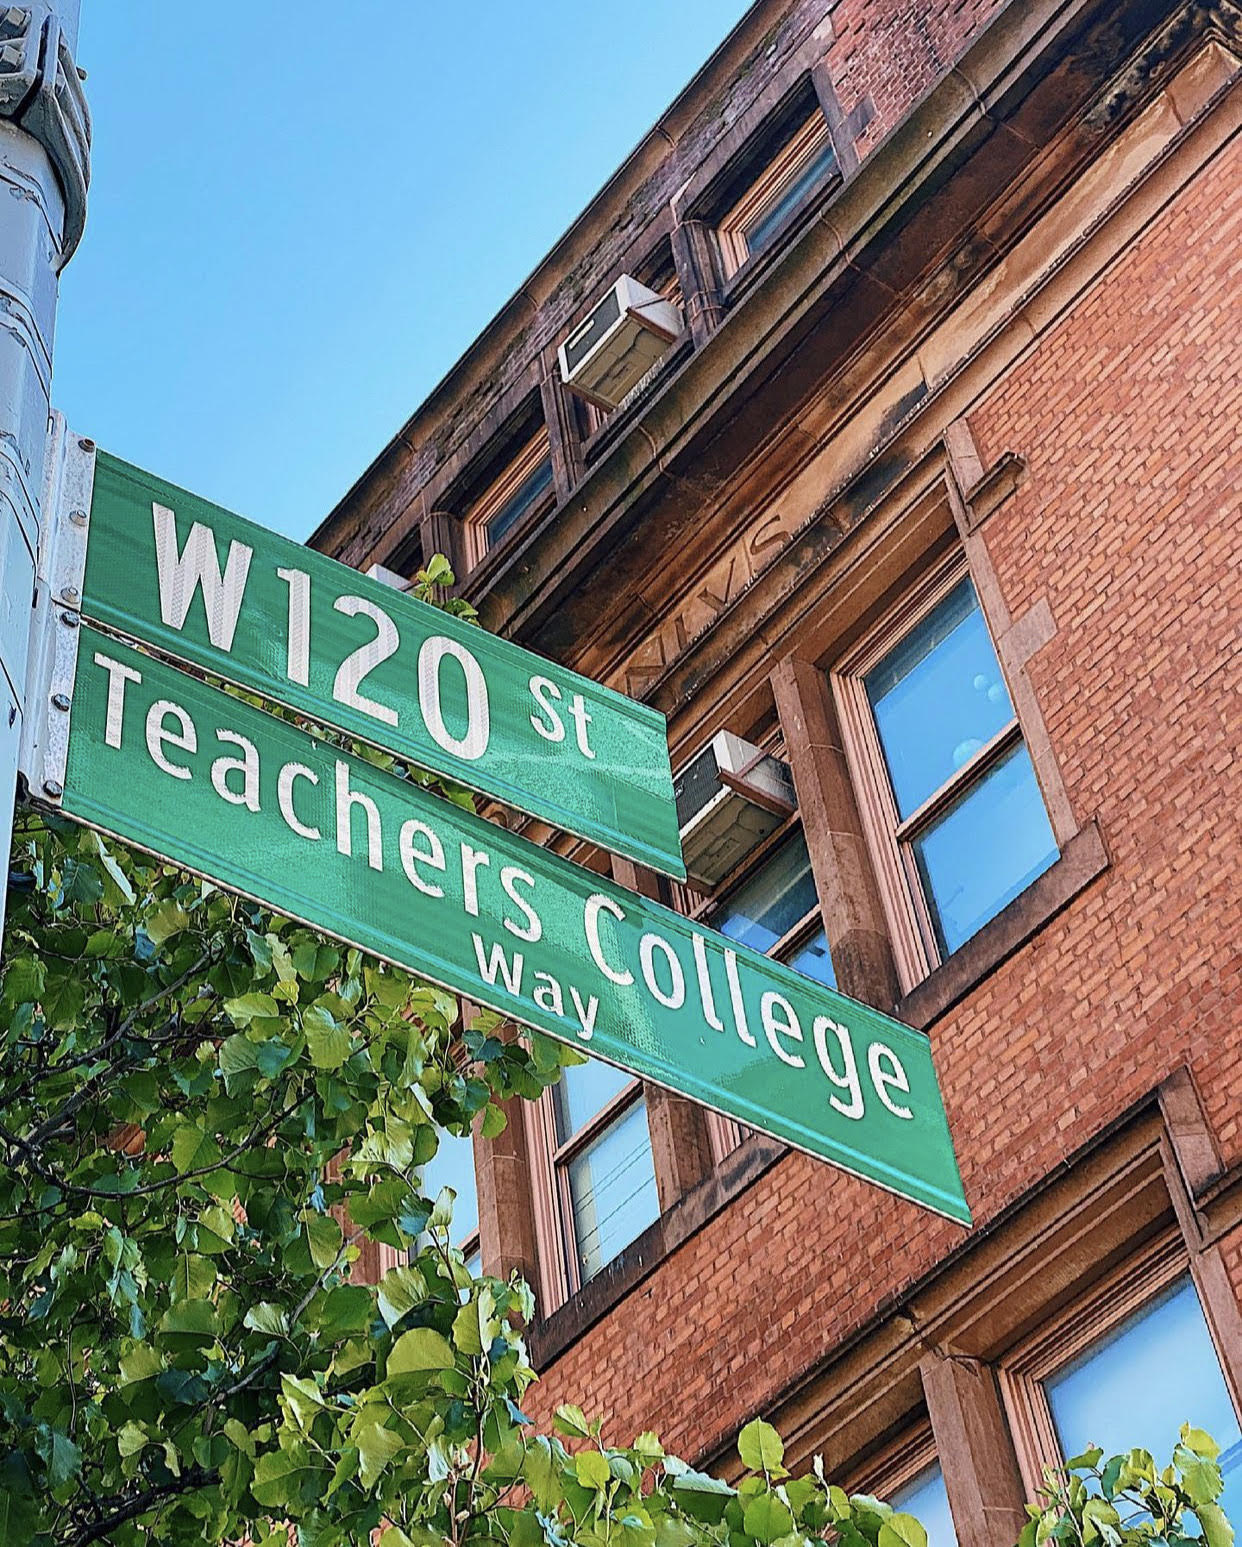 Signage of 120st and TC Way